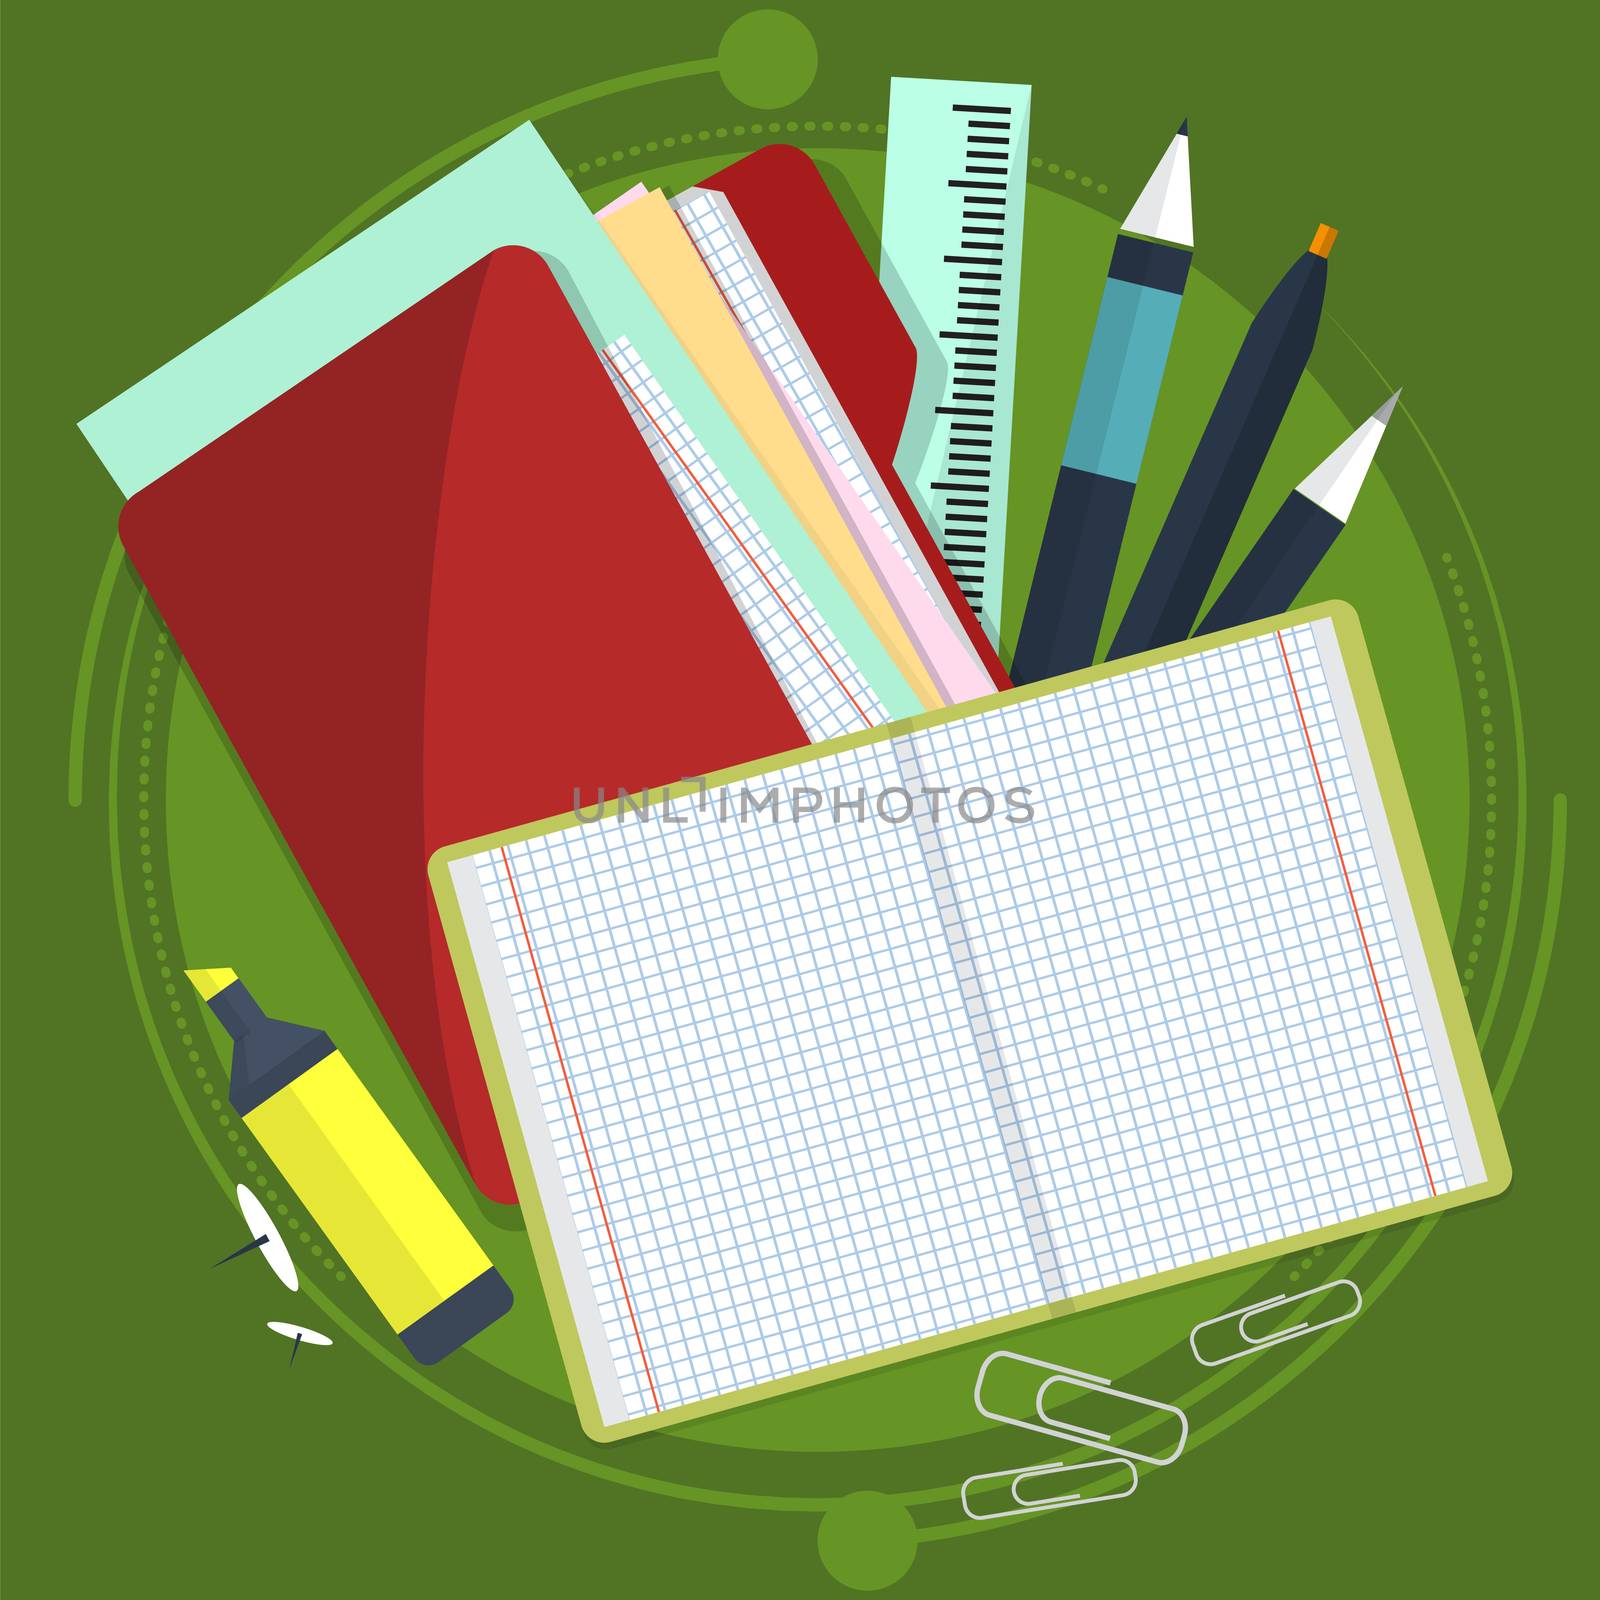 Books and school process. Writing and Drawing in zoshite. Office prednadlezhnosti and study subjects. Back to school. illustration